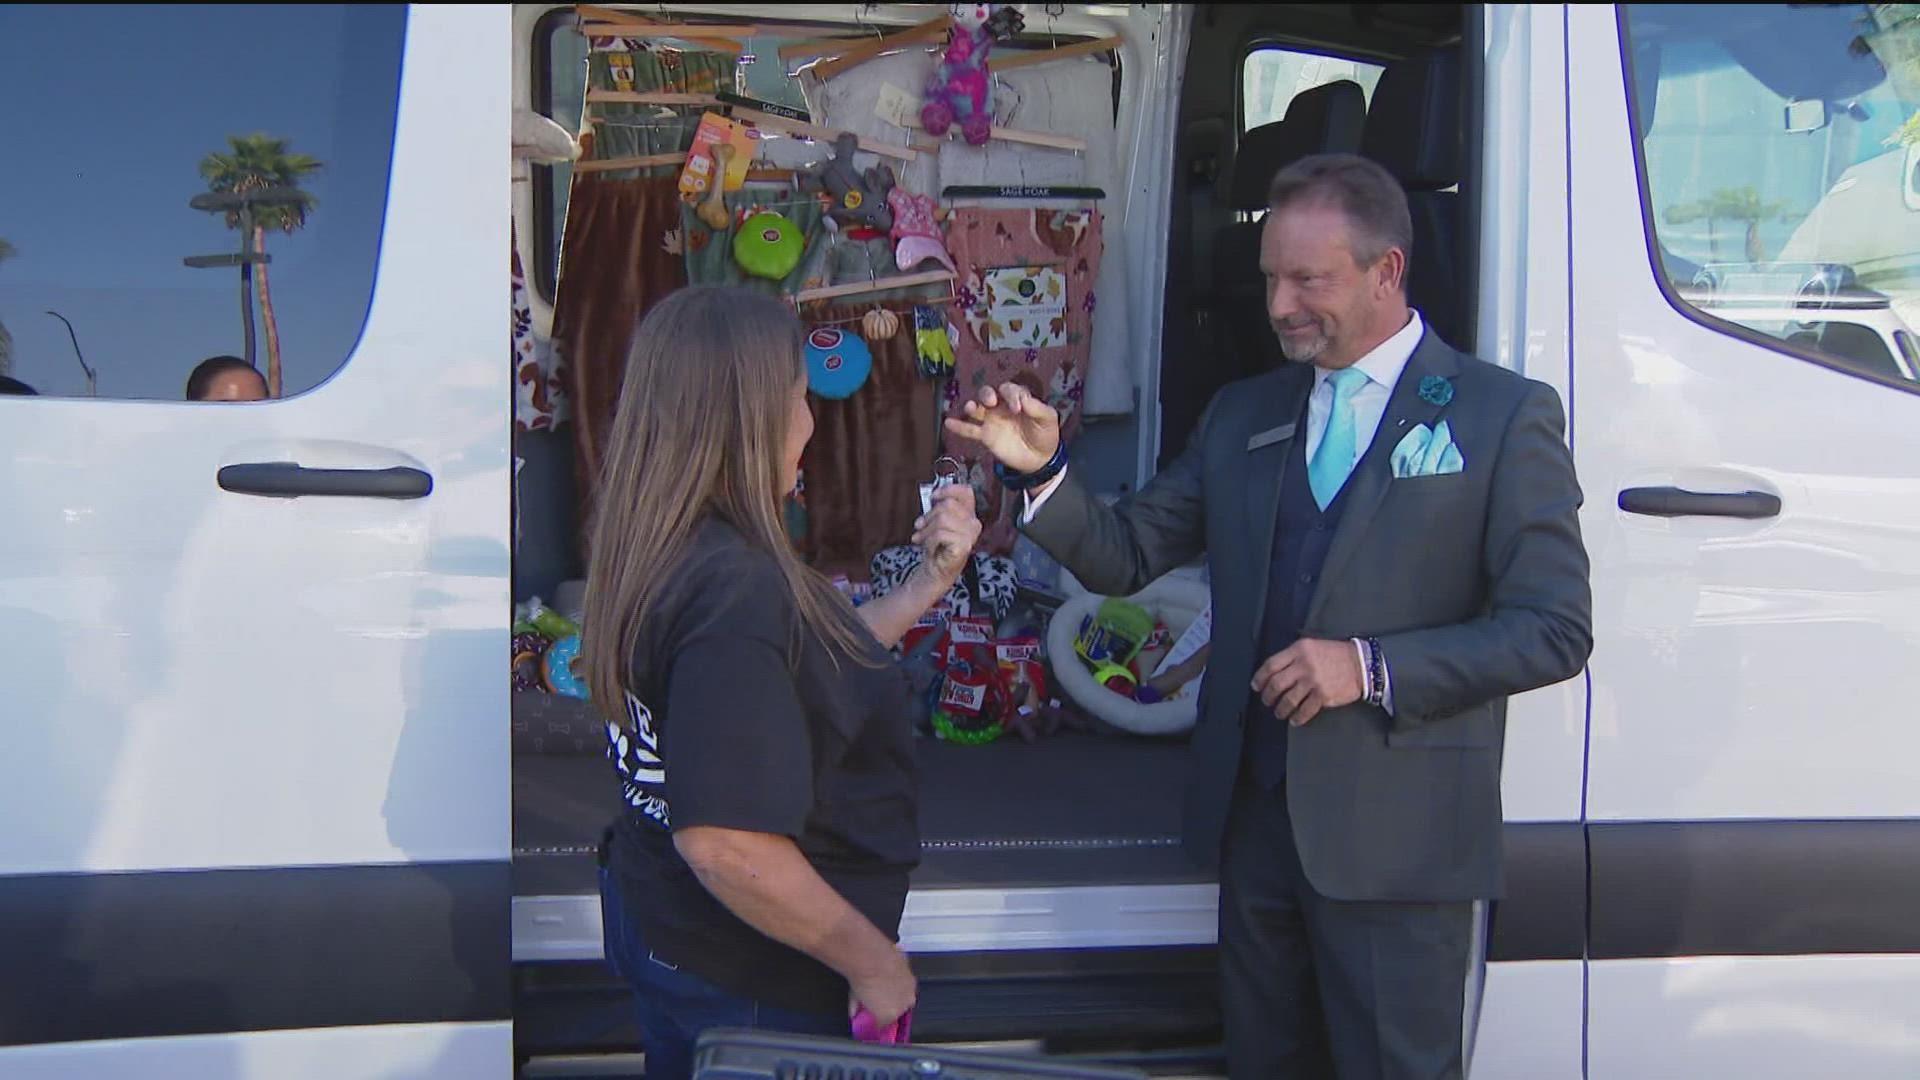 Pet Detective of 'A Way Home For Dogs' was donated a new van.